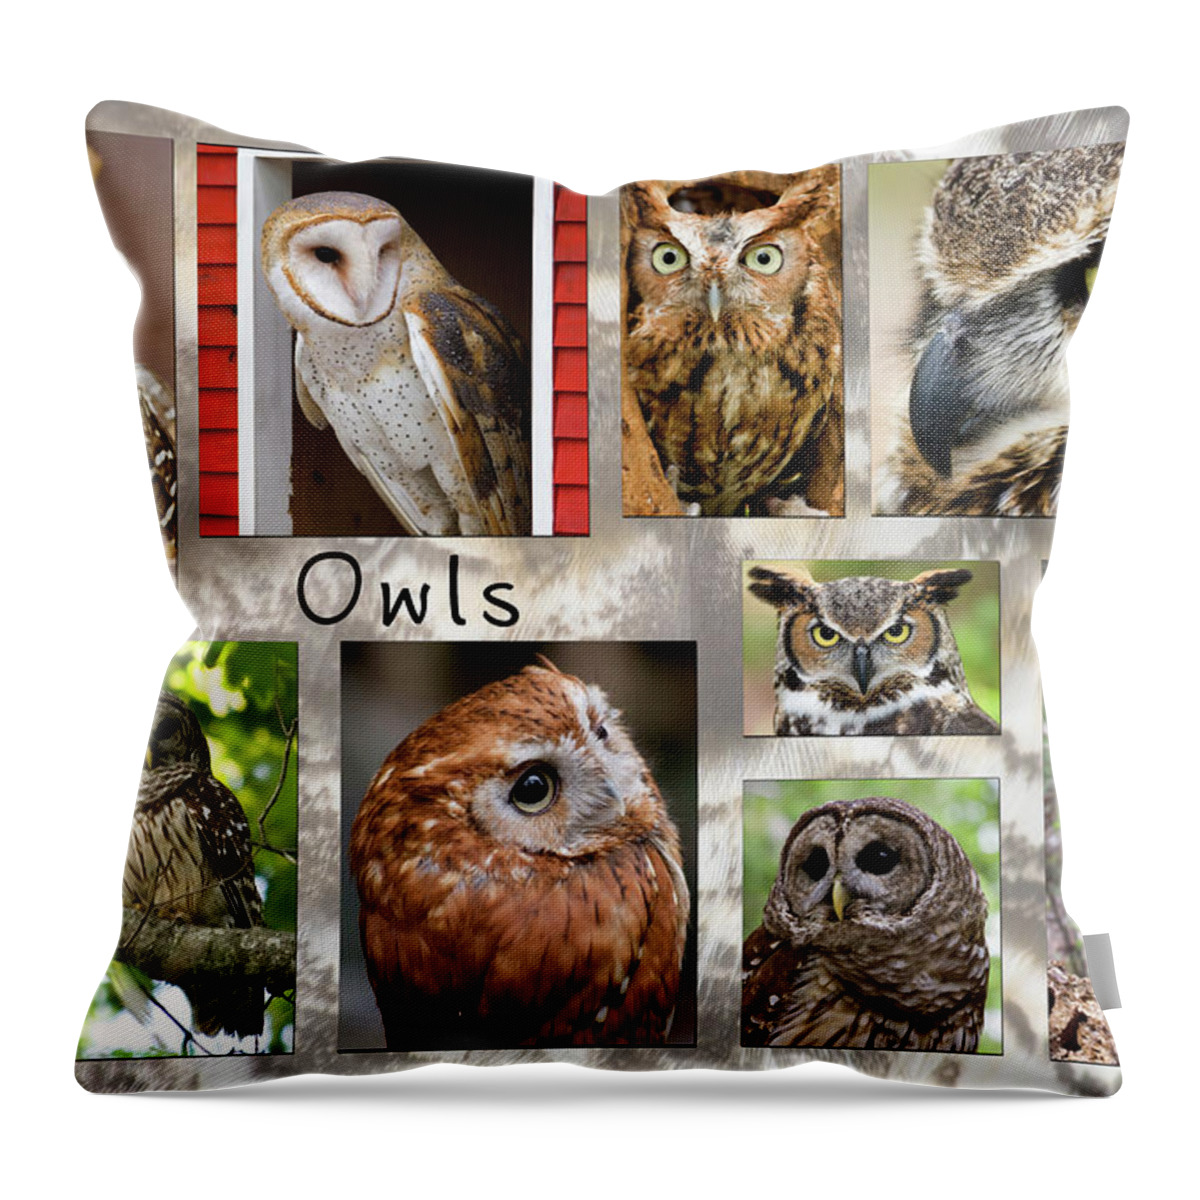 Owls Throw Pillow featuring the photograph Owl Photomontage by Jill Lang